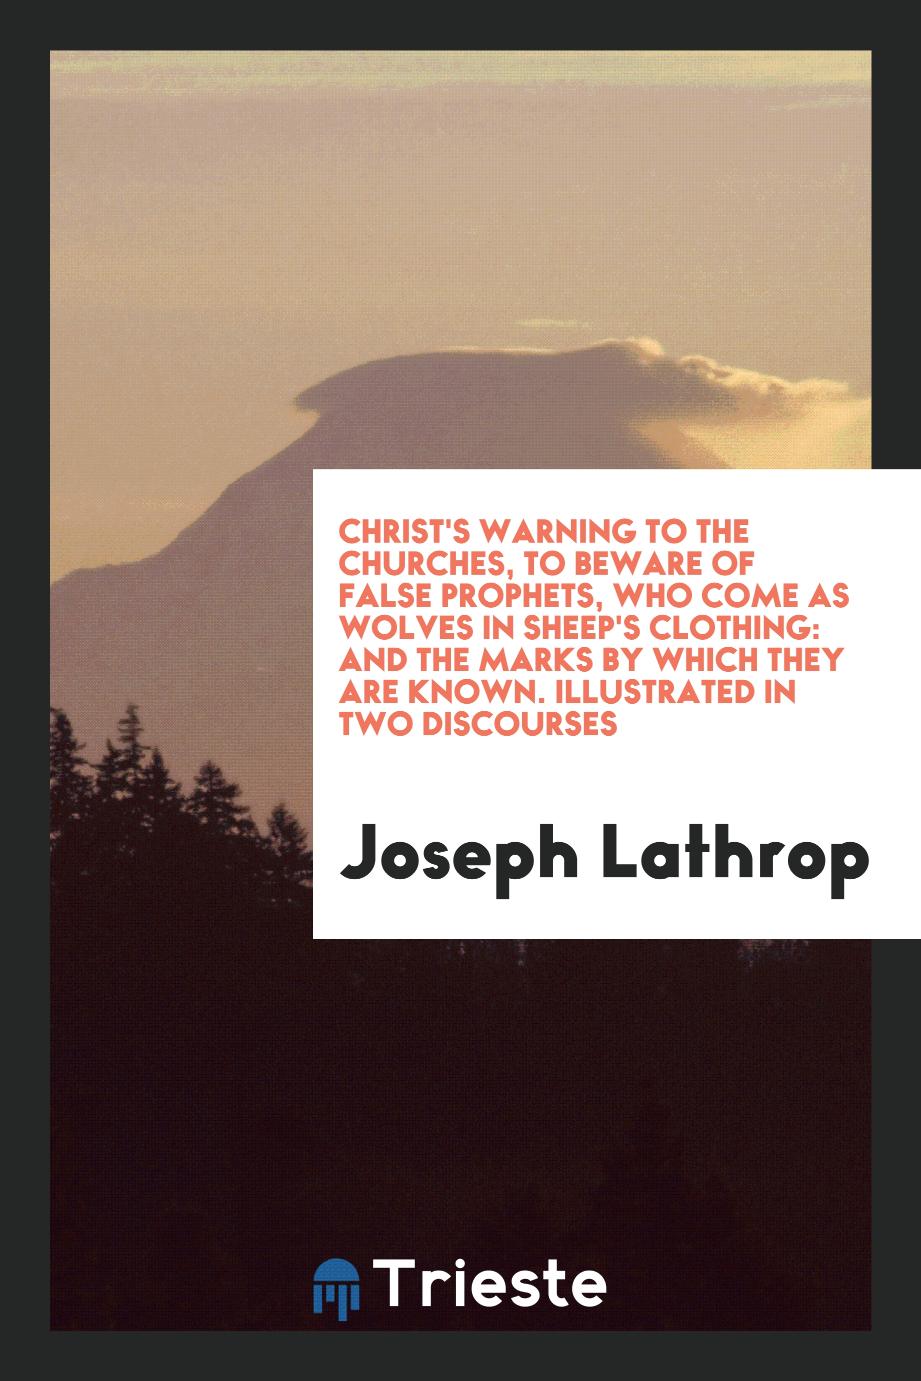 Christ's Warning to the Churches, to Beware of False Prophets, Who Come as Wolves in Sheep's Clothing: And the Marks by Which They Are Known. Illustrated in Two Discourses